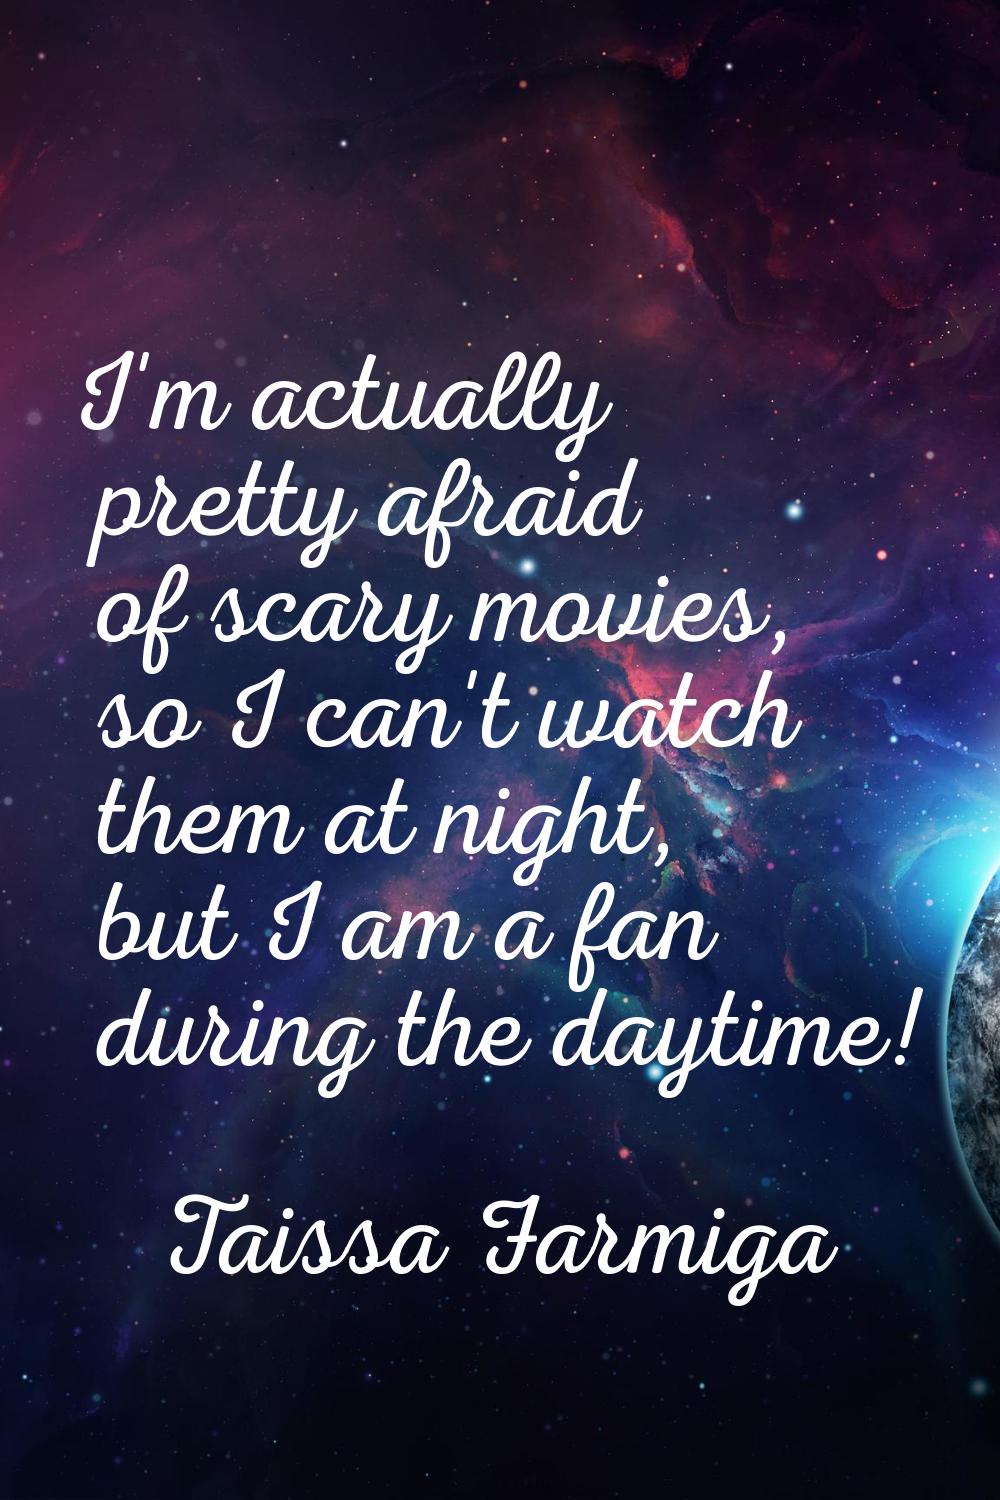 I'm actually pretty afraid of scary movies, so I can't watch them at night, but I am a fan during t